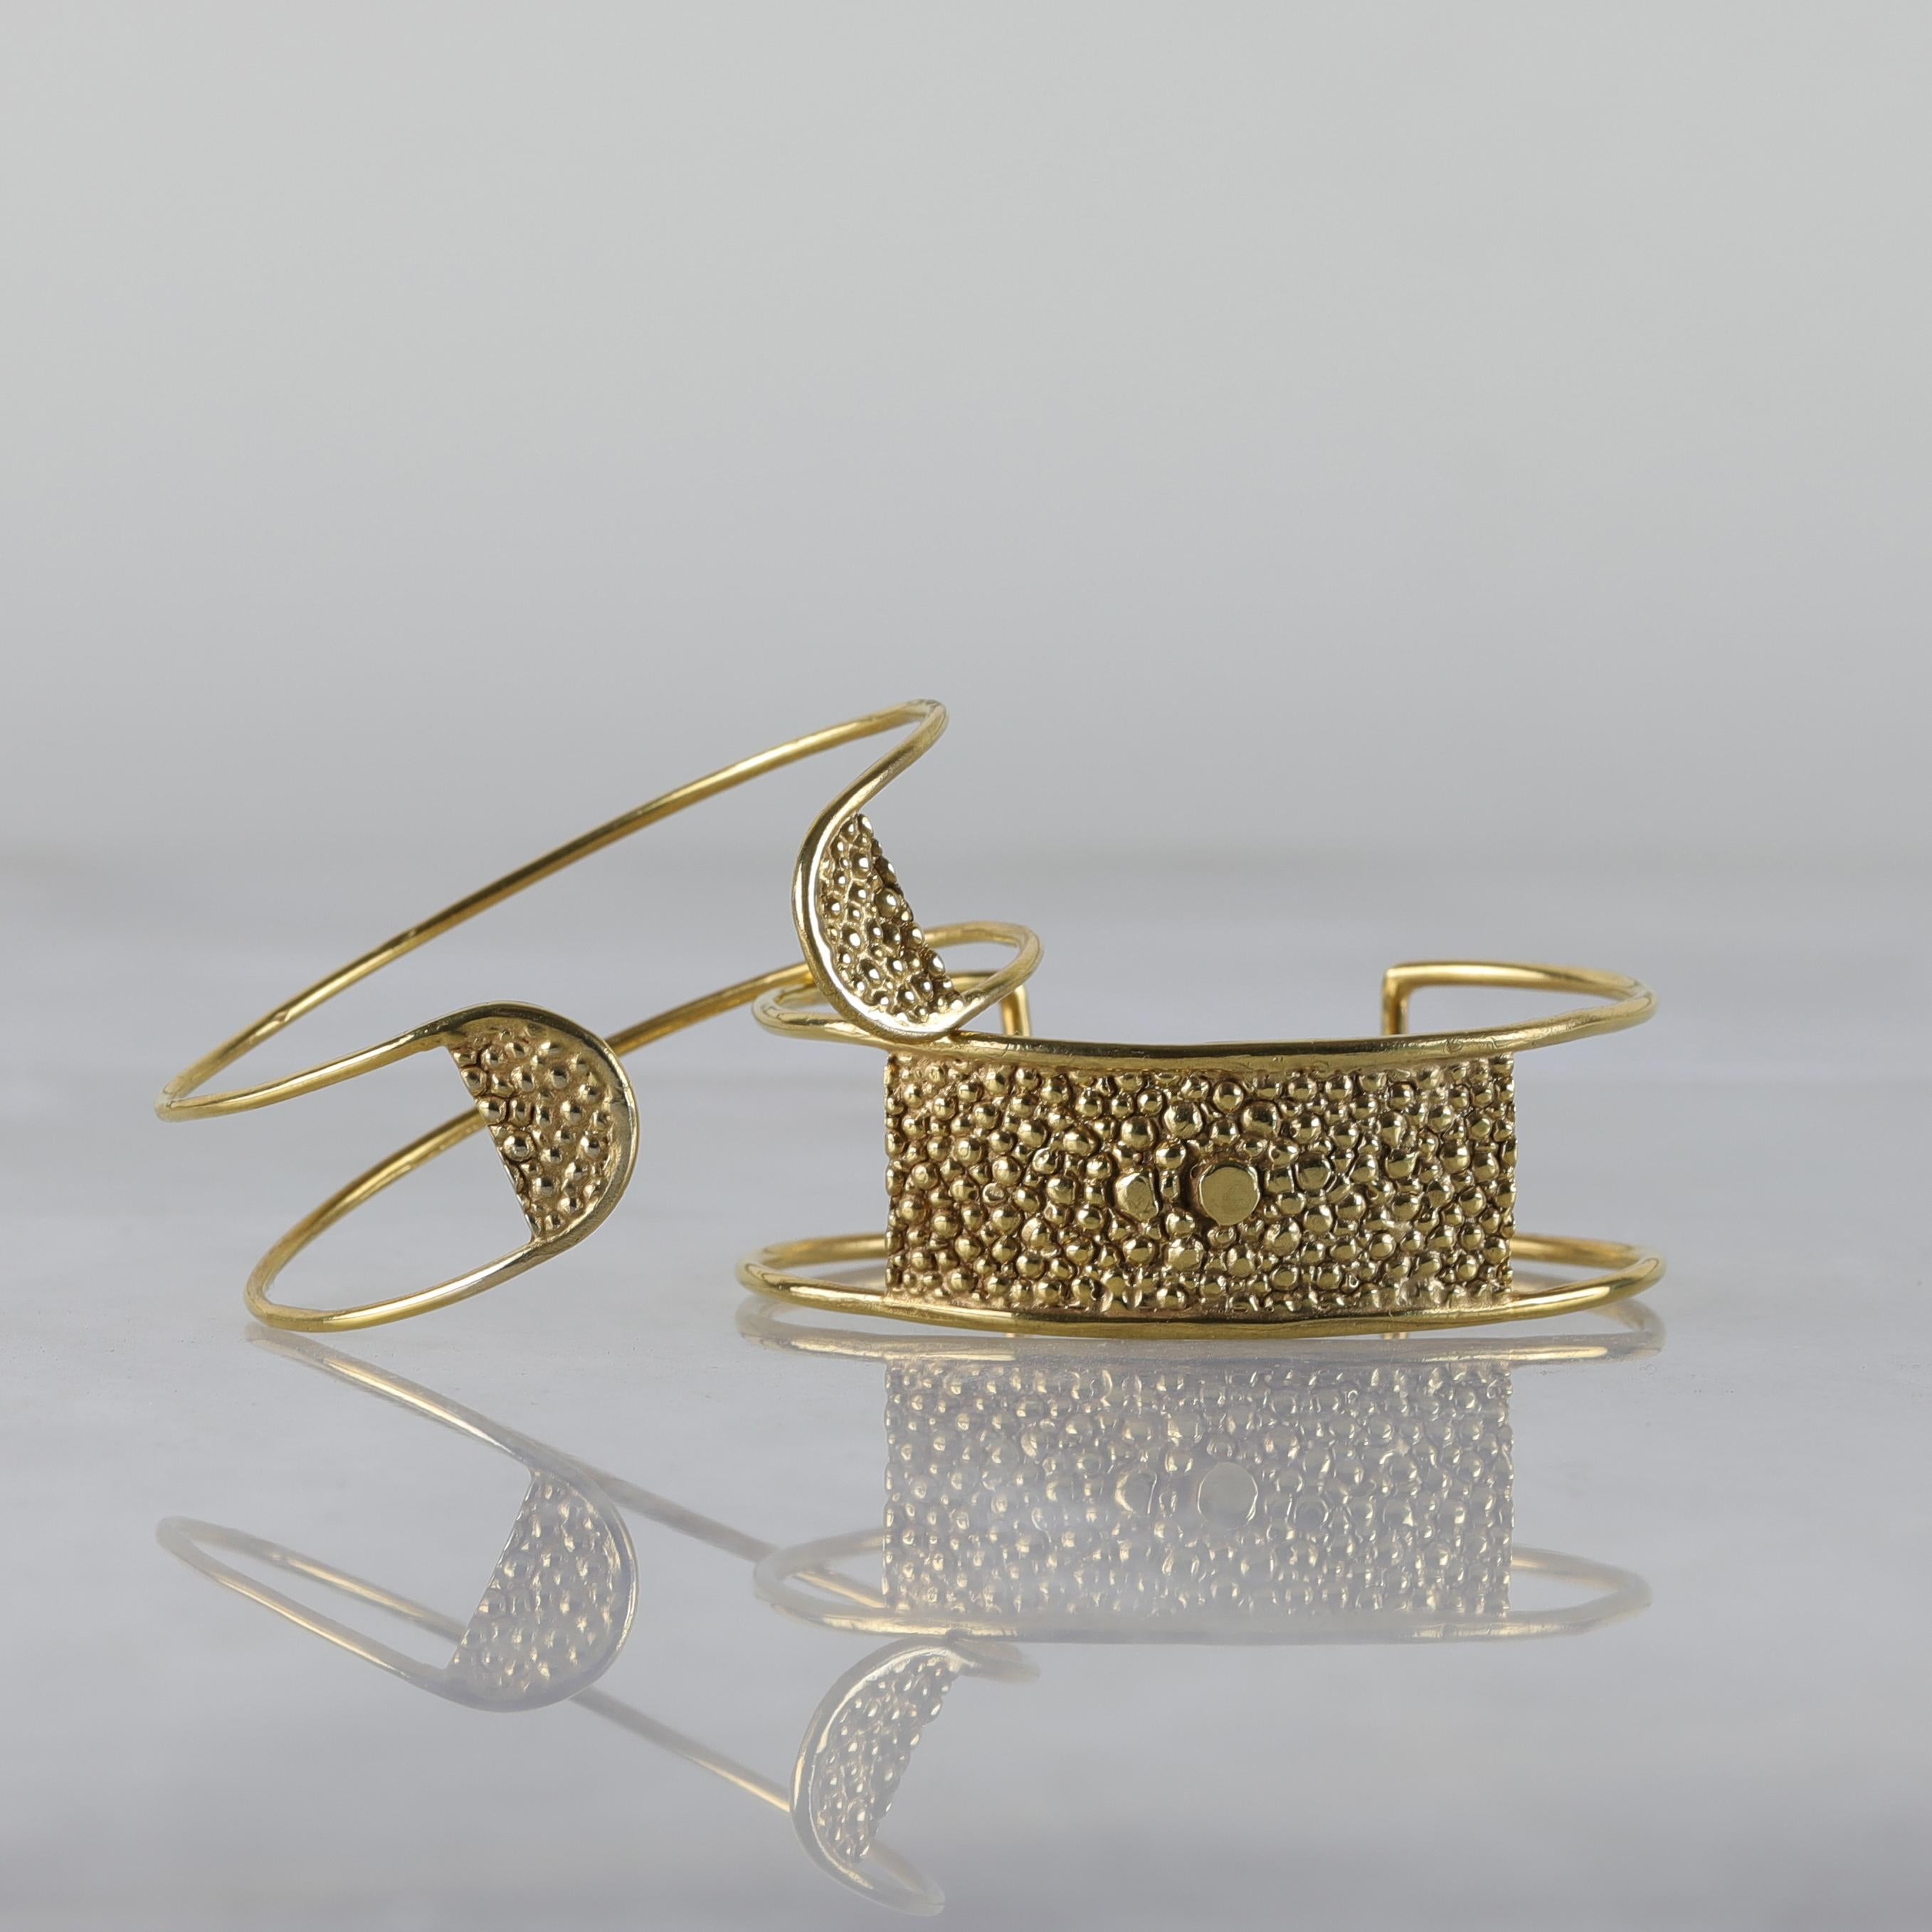 Lauren Newton Stingray Bar Cuff Bracelet in Textured Metal In New Condition For Sale In Brooklyn, NY